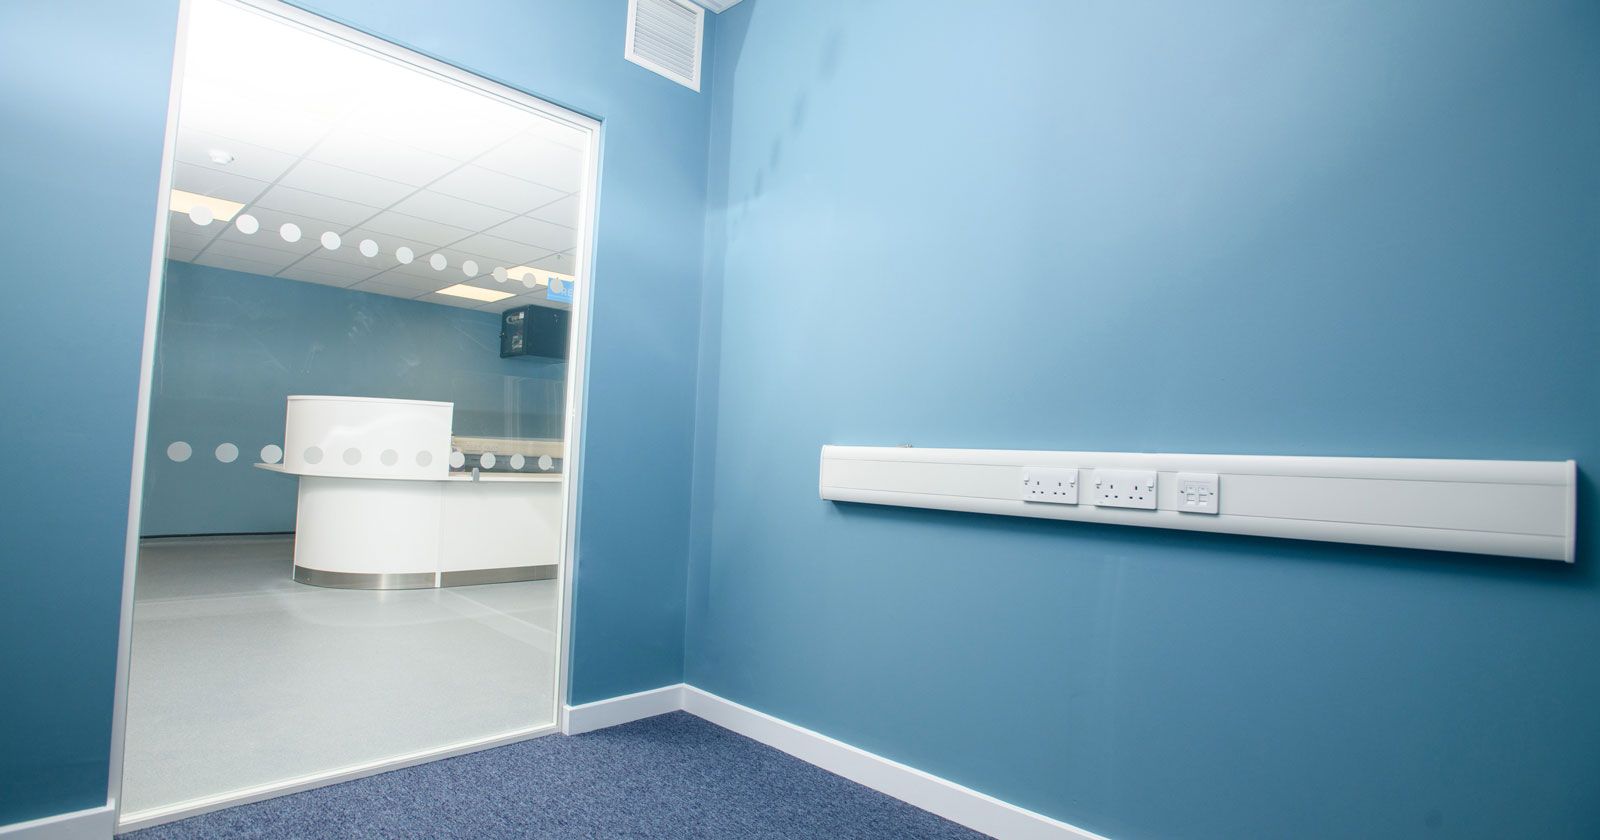 Queensgate Medical Centre Glass Partitions and Electrical Installation by APSS